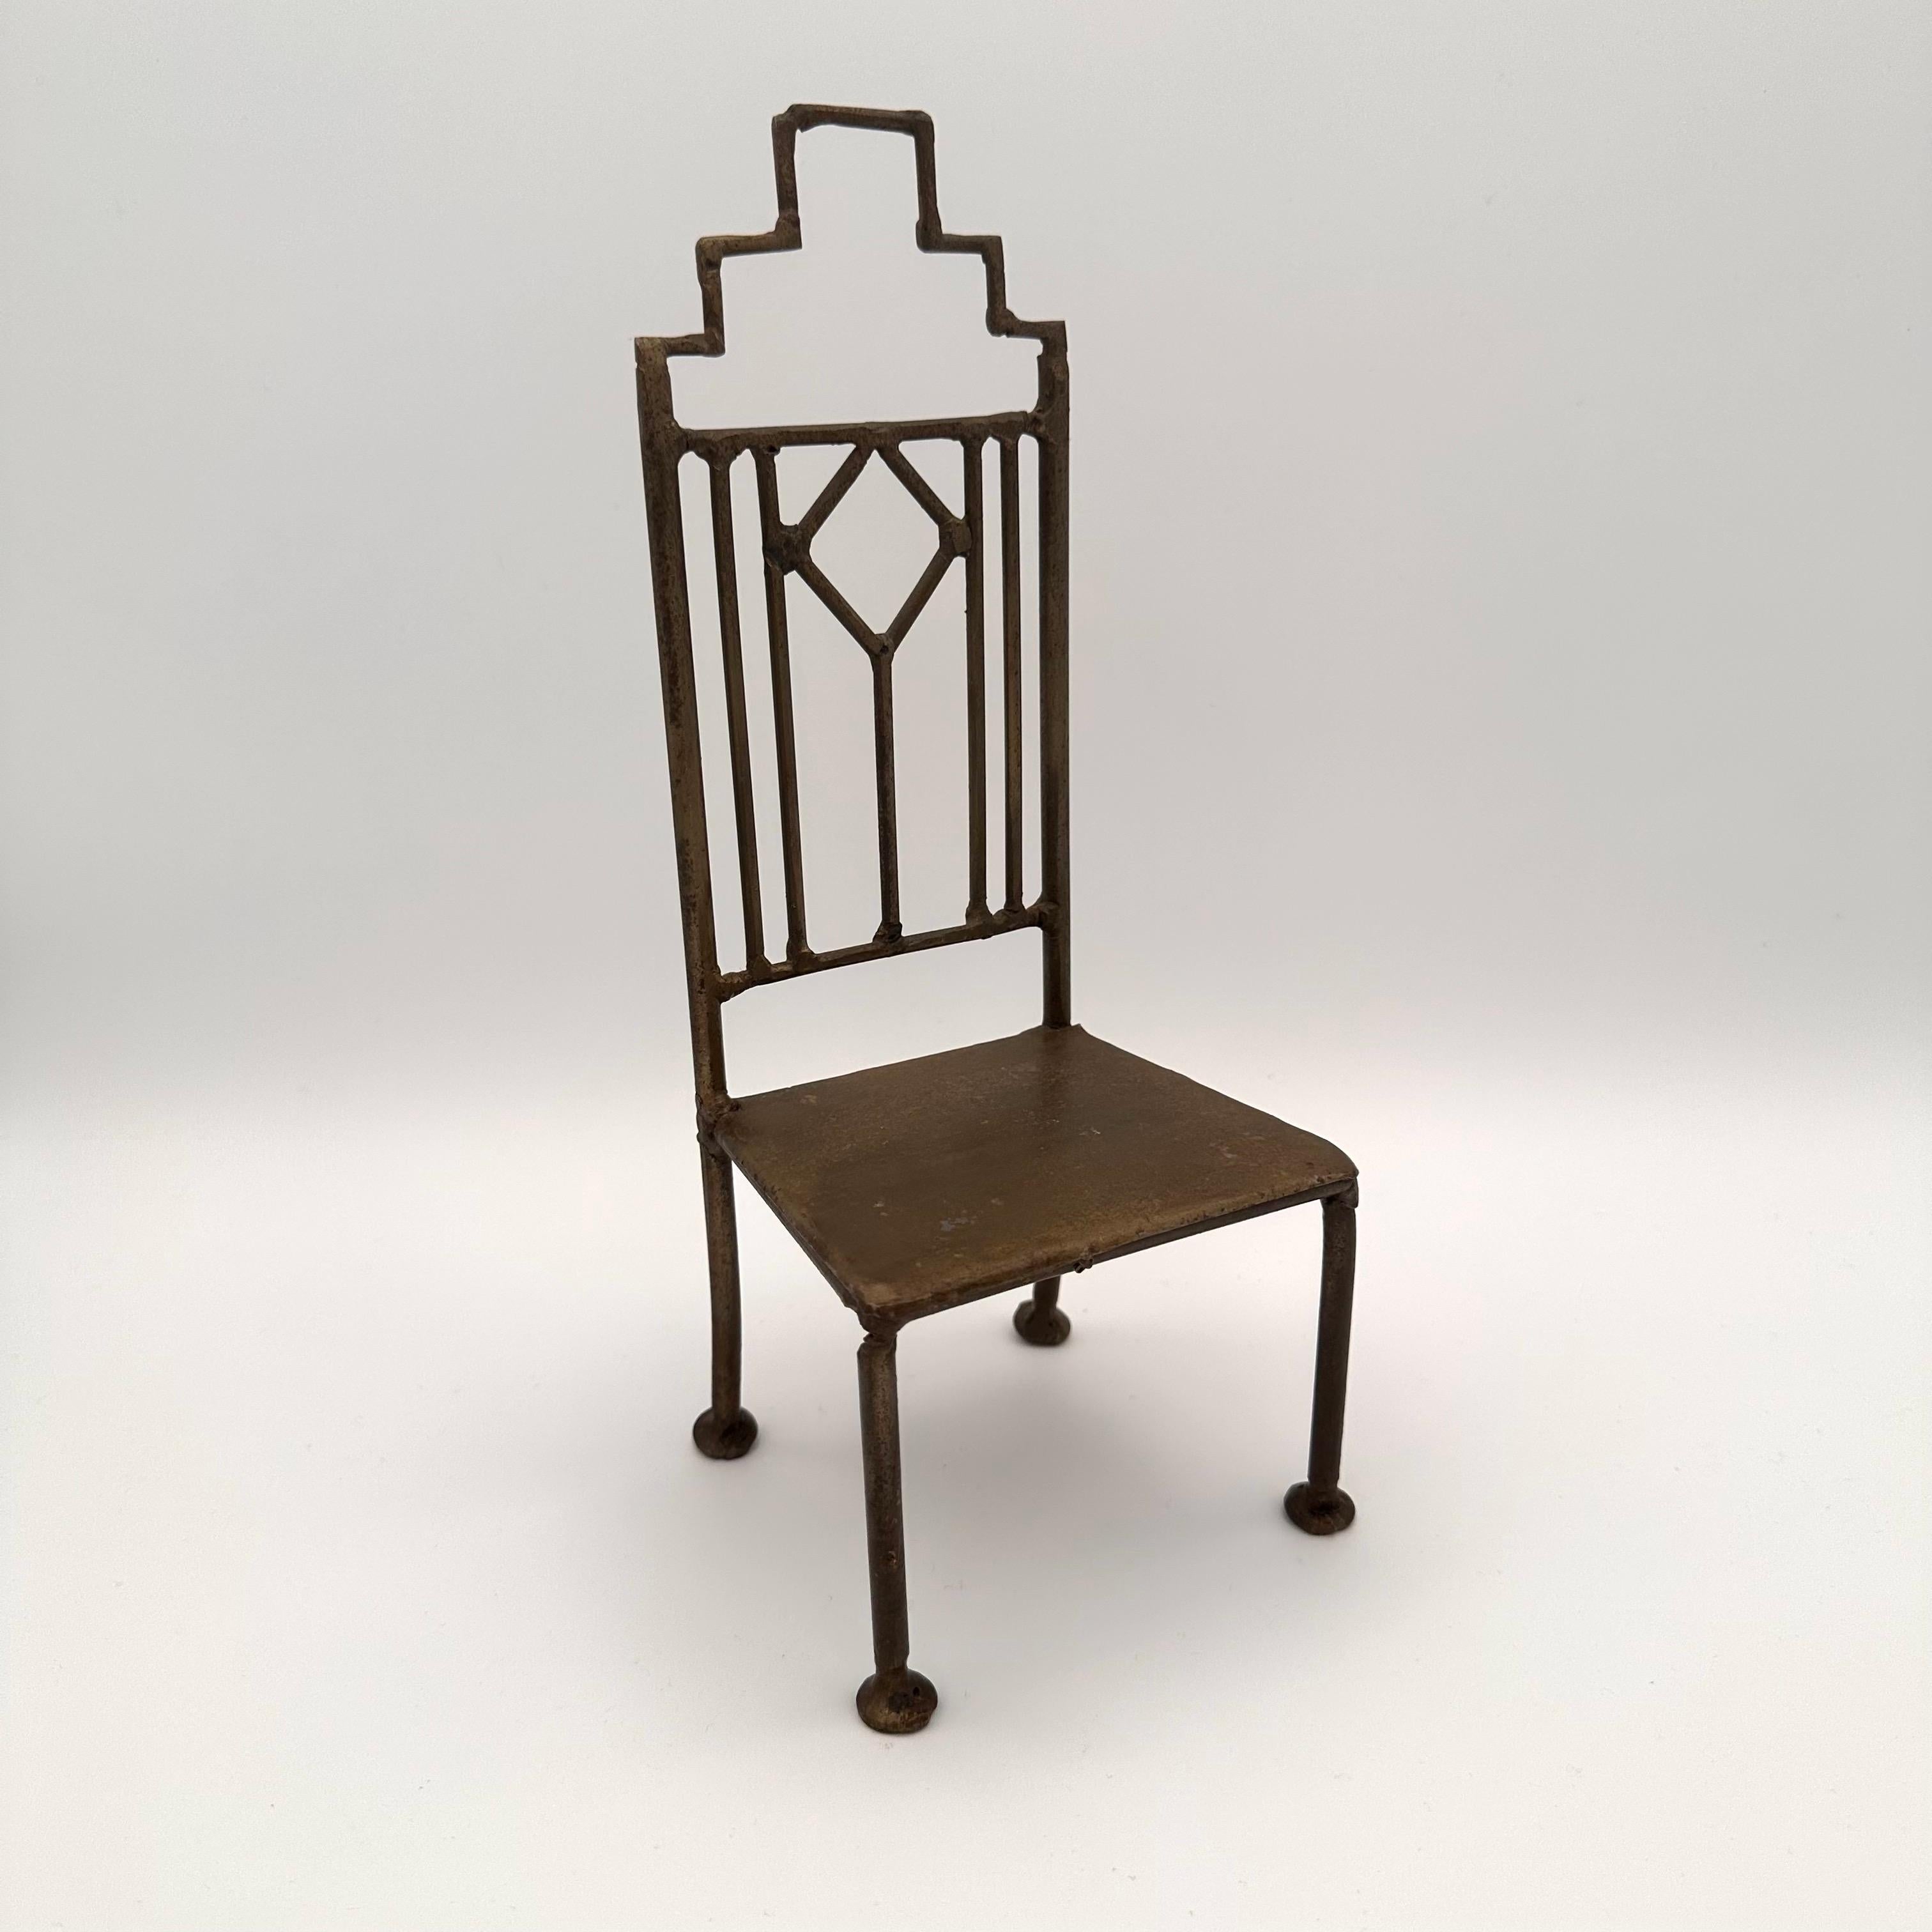 Unique handmade vintage miniature metal chair. Art Deco inspired with a geometric skyscraper - like diamond and rectangle design on the back. The seat surface is flat and can hold a candle or small plant. The entire piece has an obvious handmade